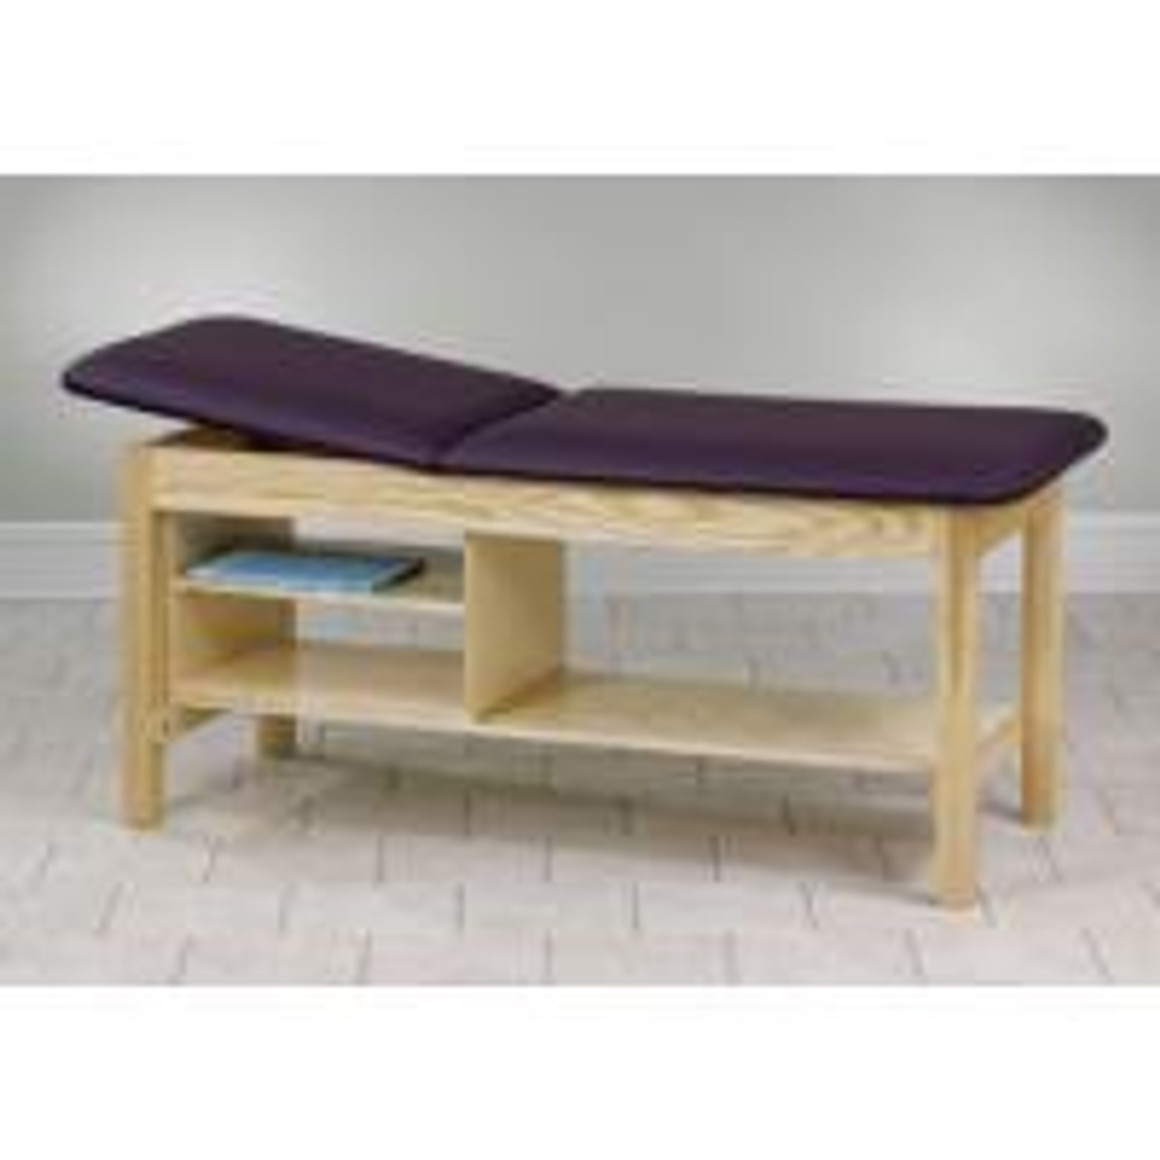 Clinton Classic Series Straight Line Treatment Table with Shelving Unit, 27" Wide, Burgundy